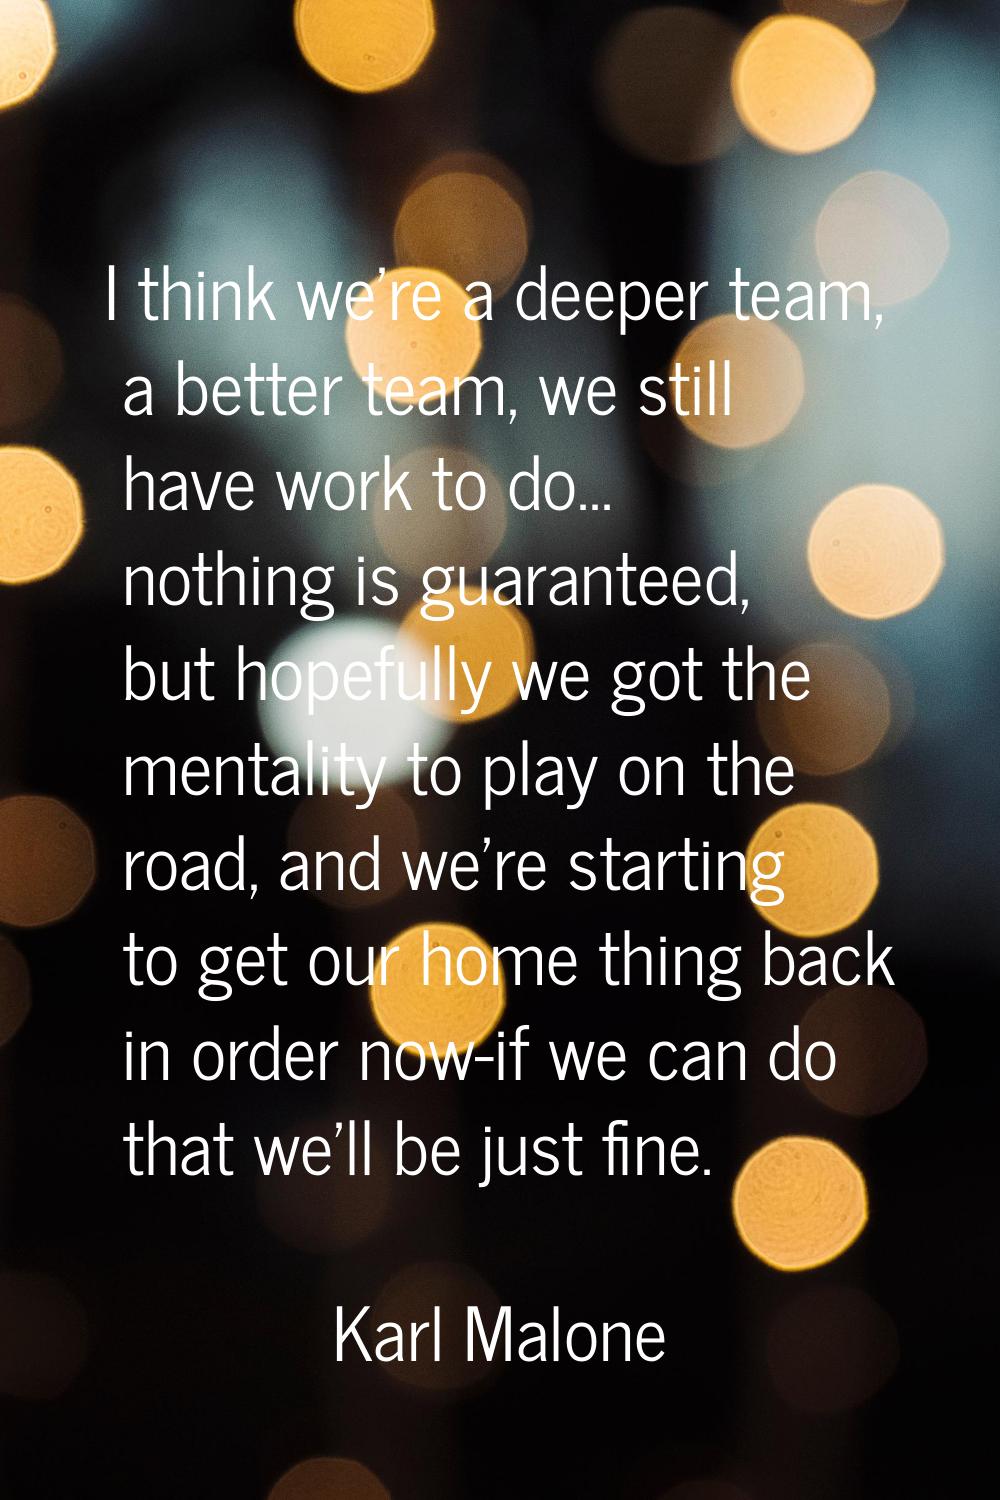 I think we're a deeper team, a better team, we still have work to do... nothing is guaranteed, but 